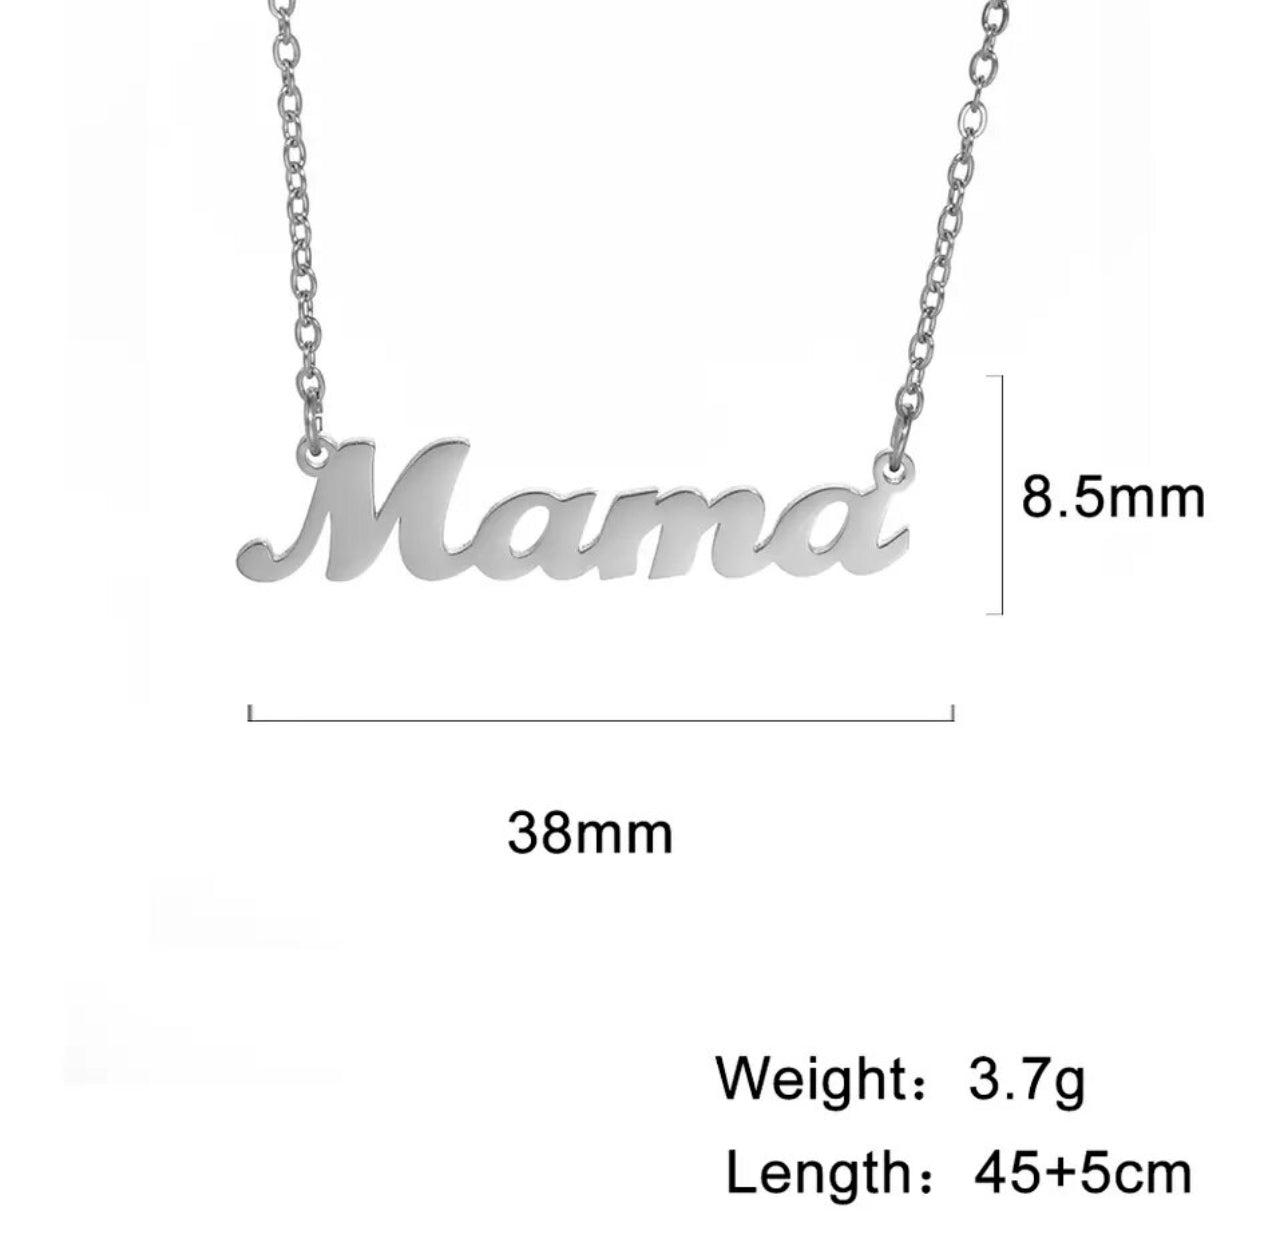 Mama Chain Necklace Gold